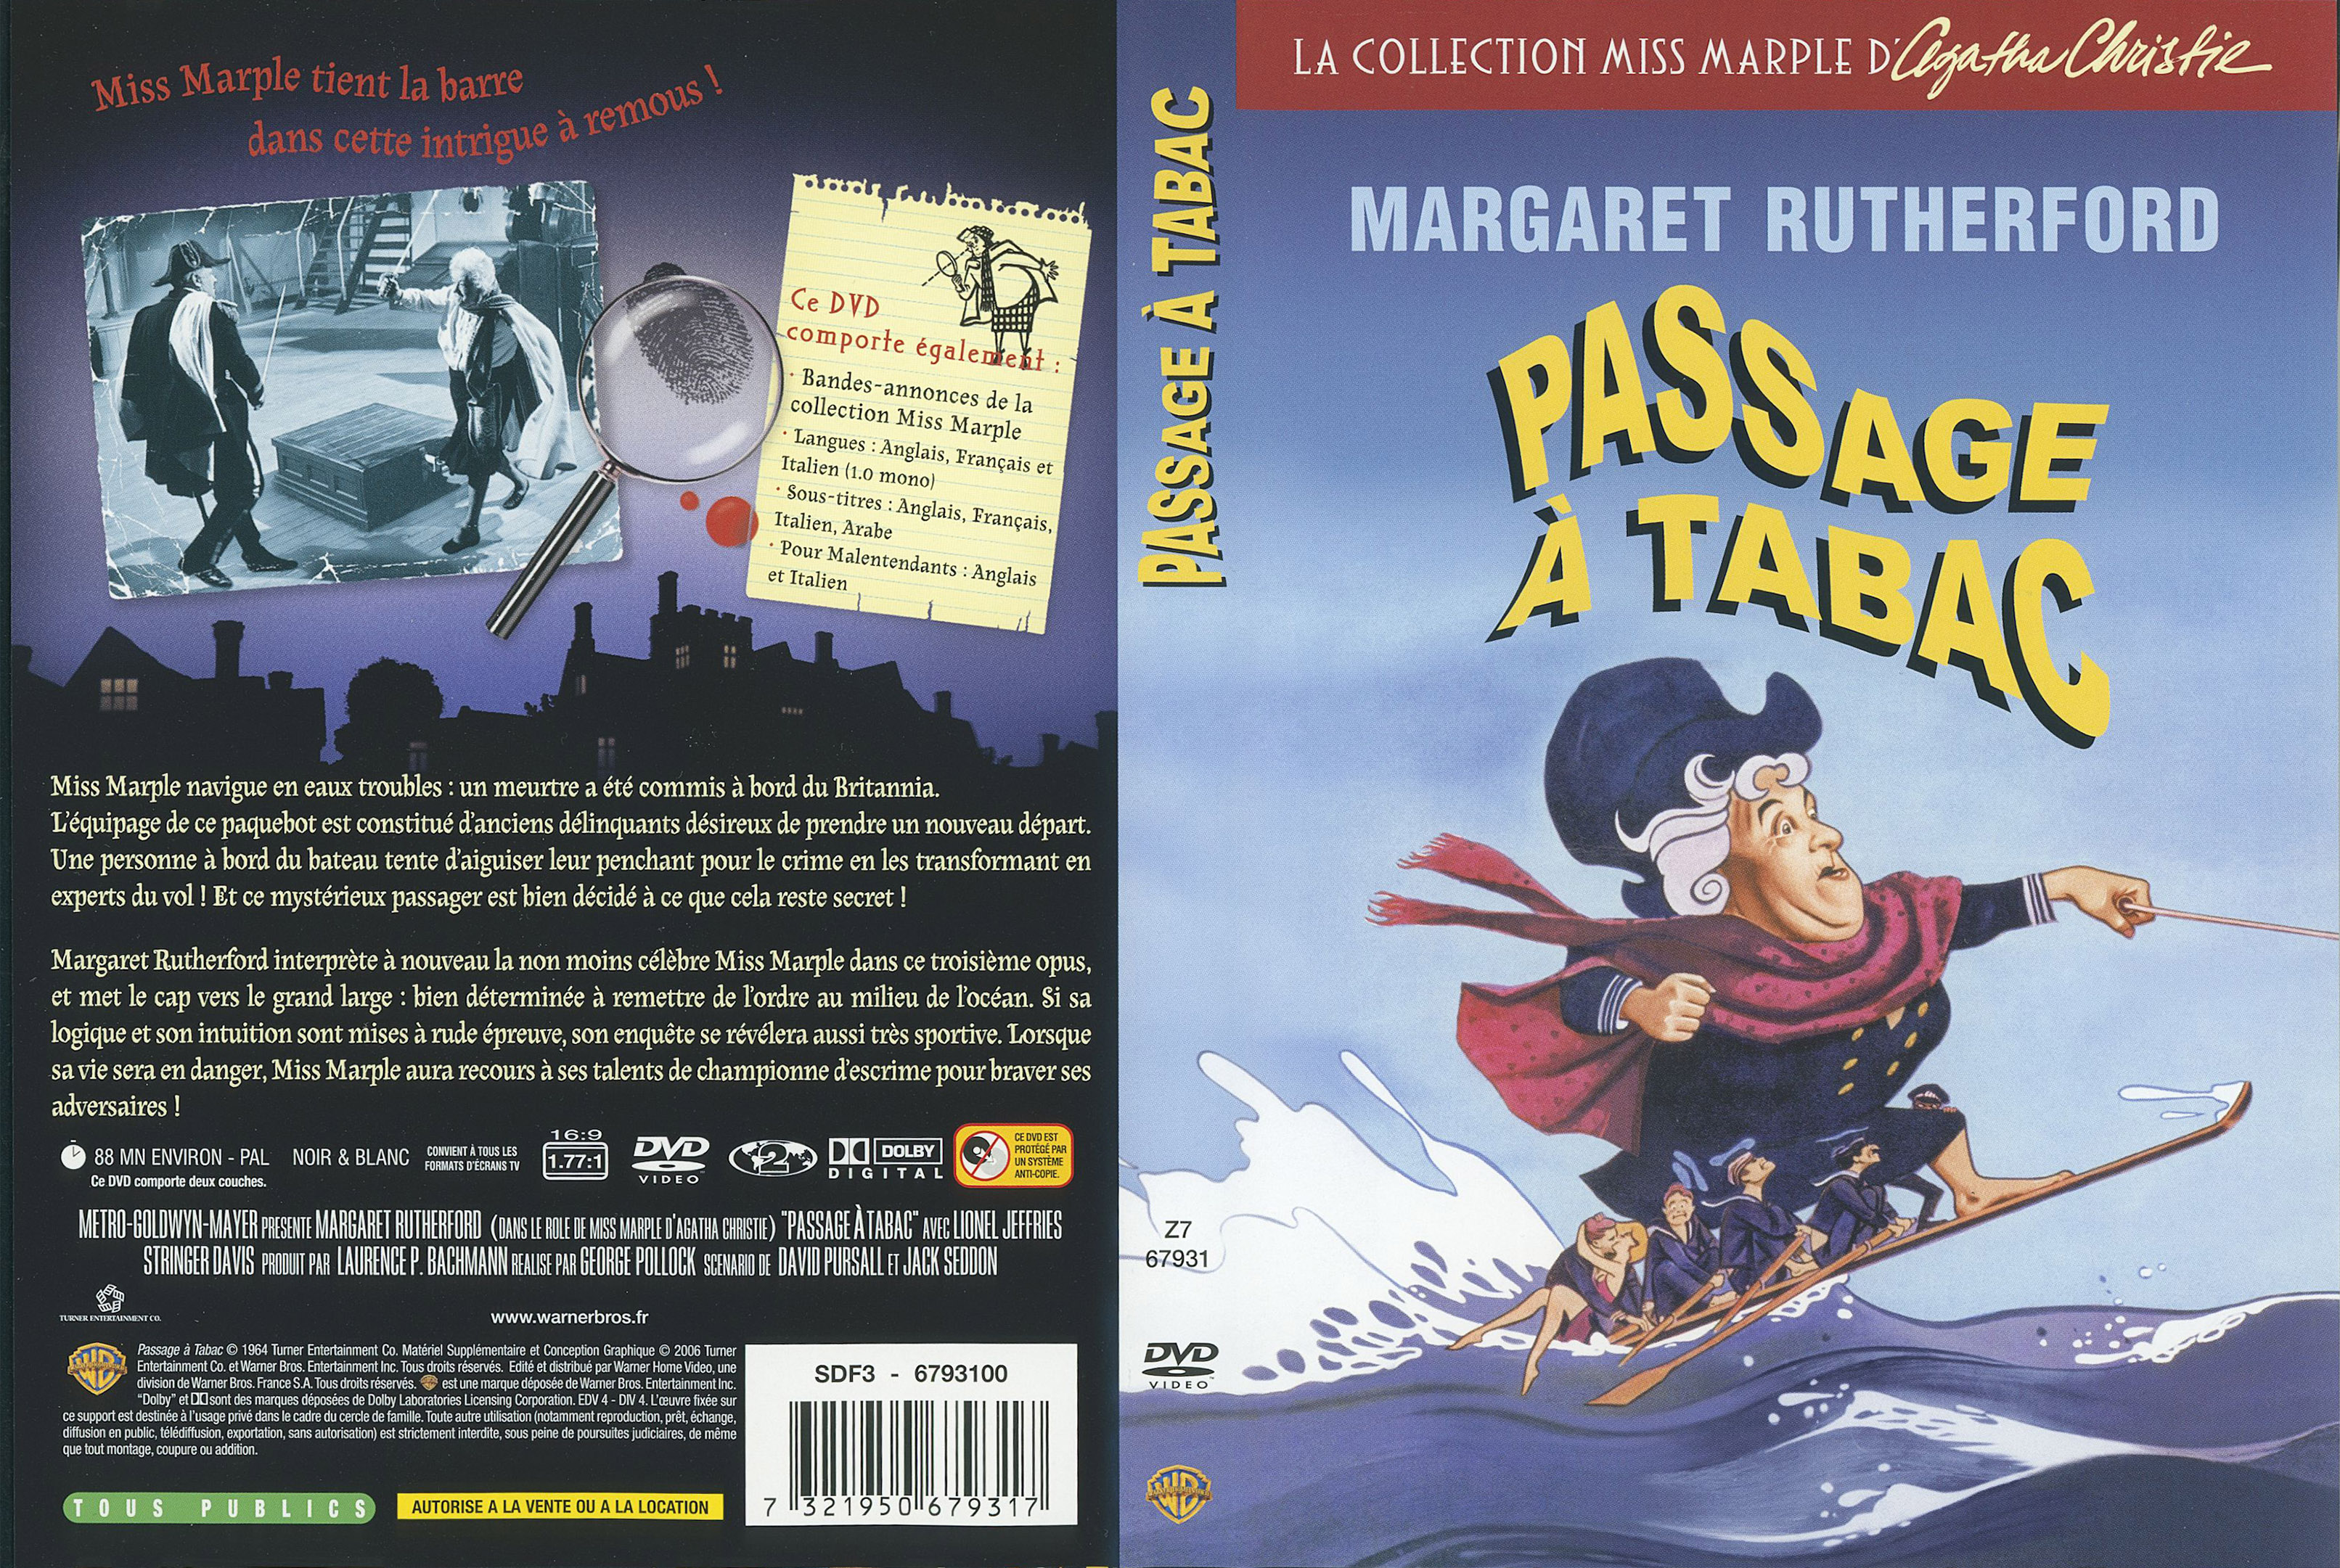 Jaquette DVD Passage  tabac